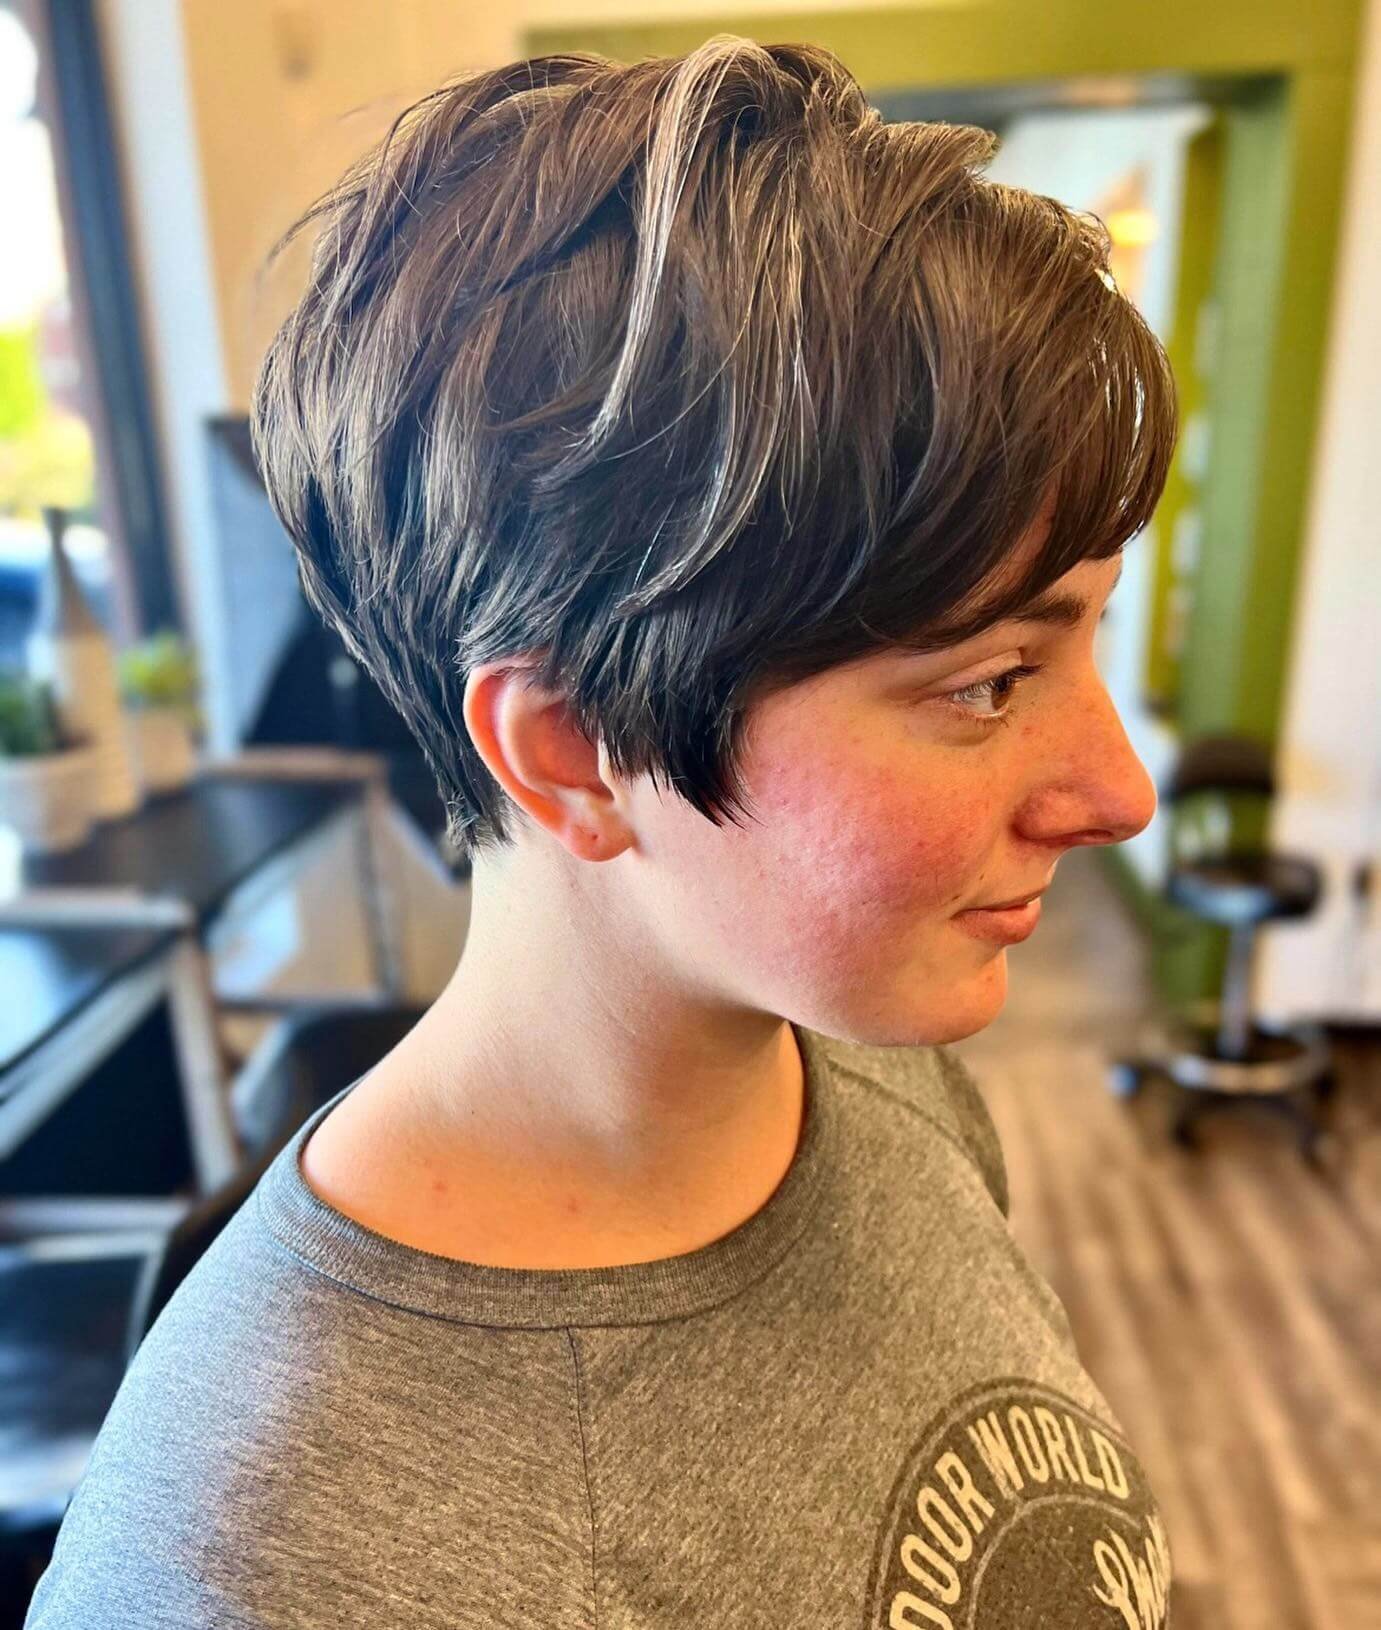 Layers and Highlights in a Pixie Cut